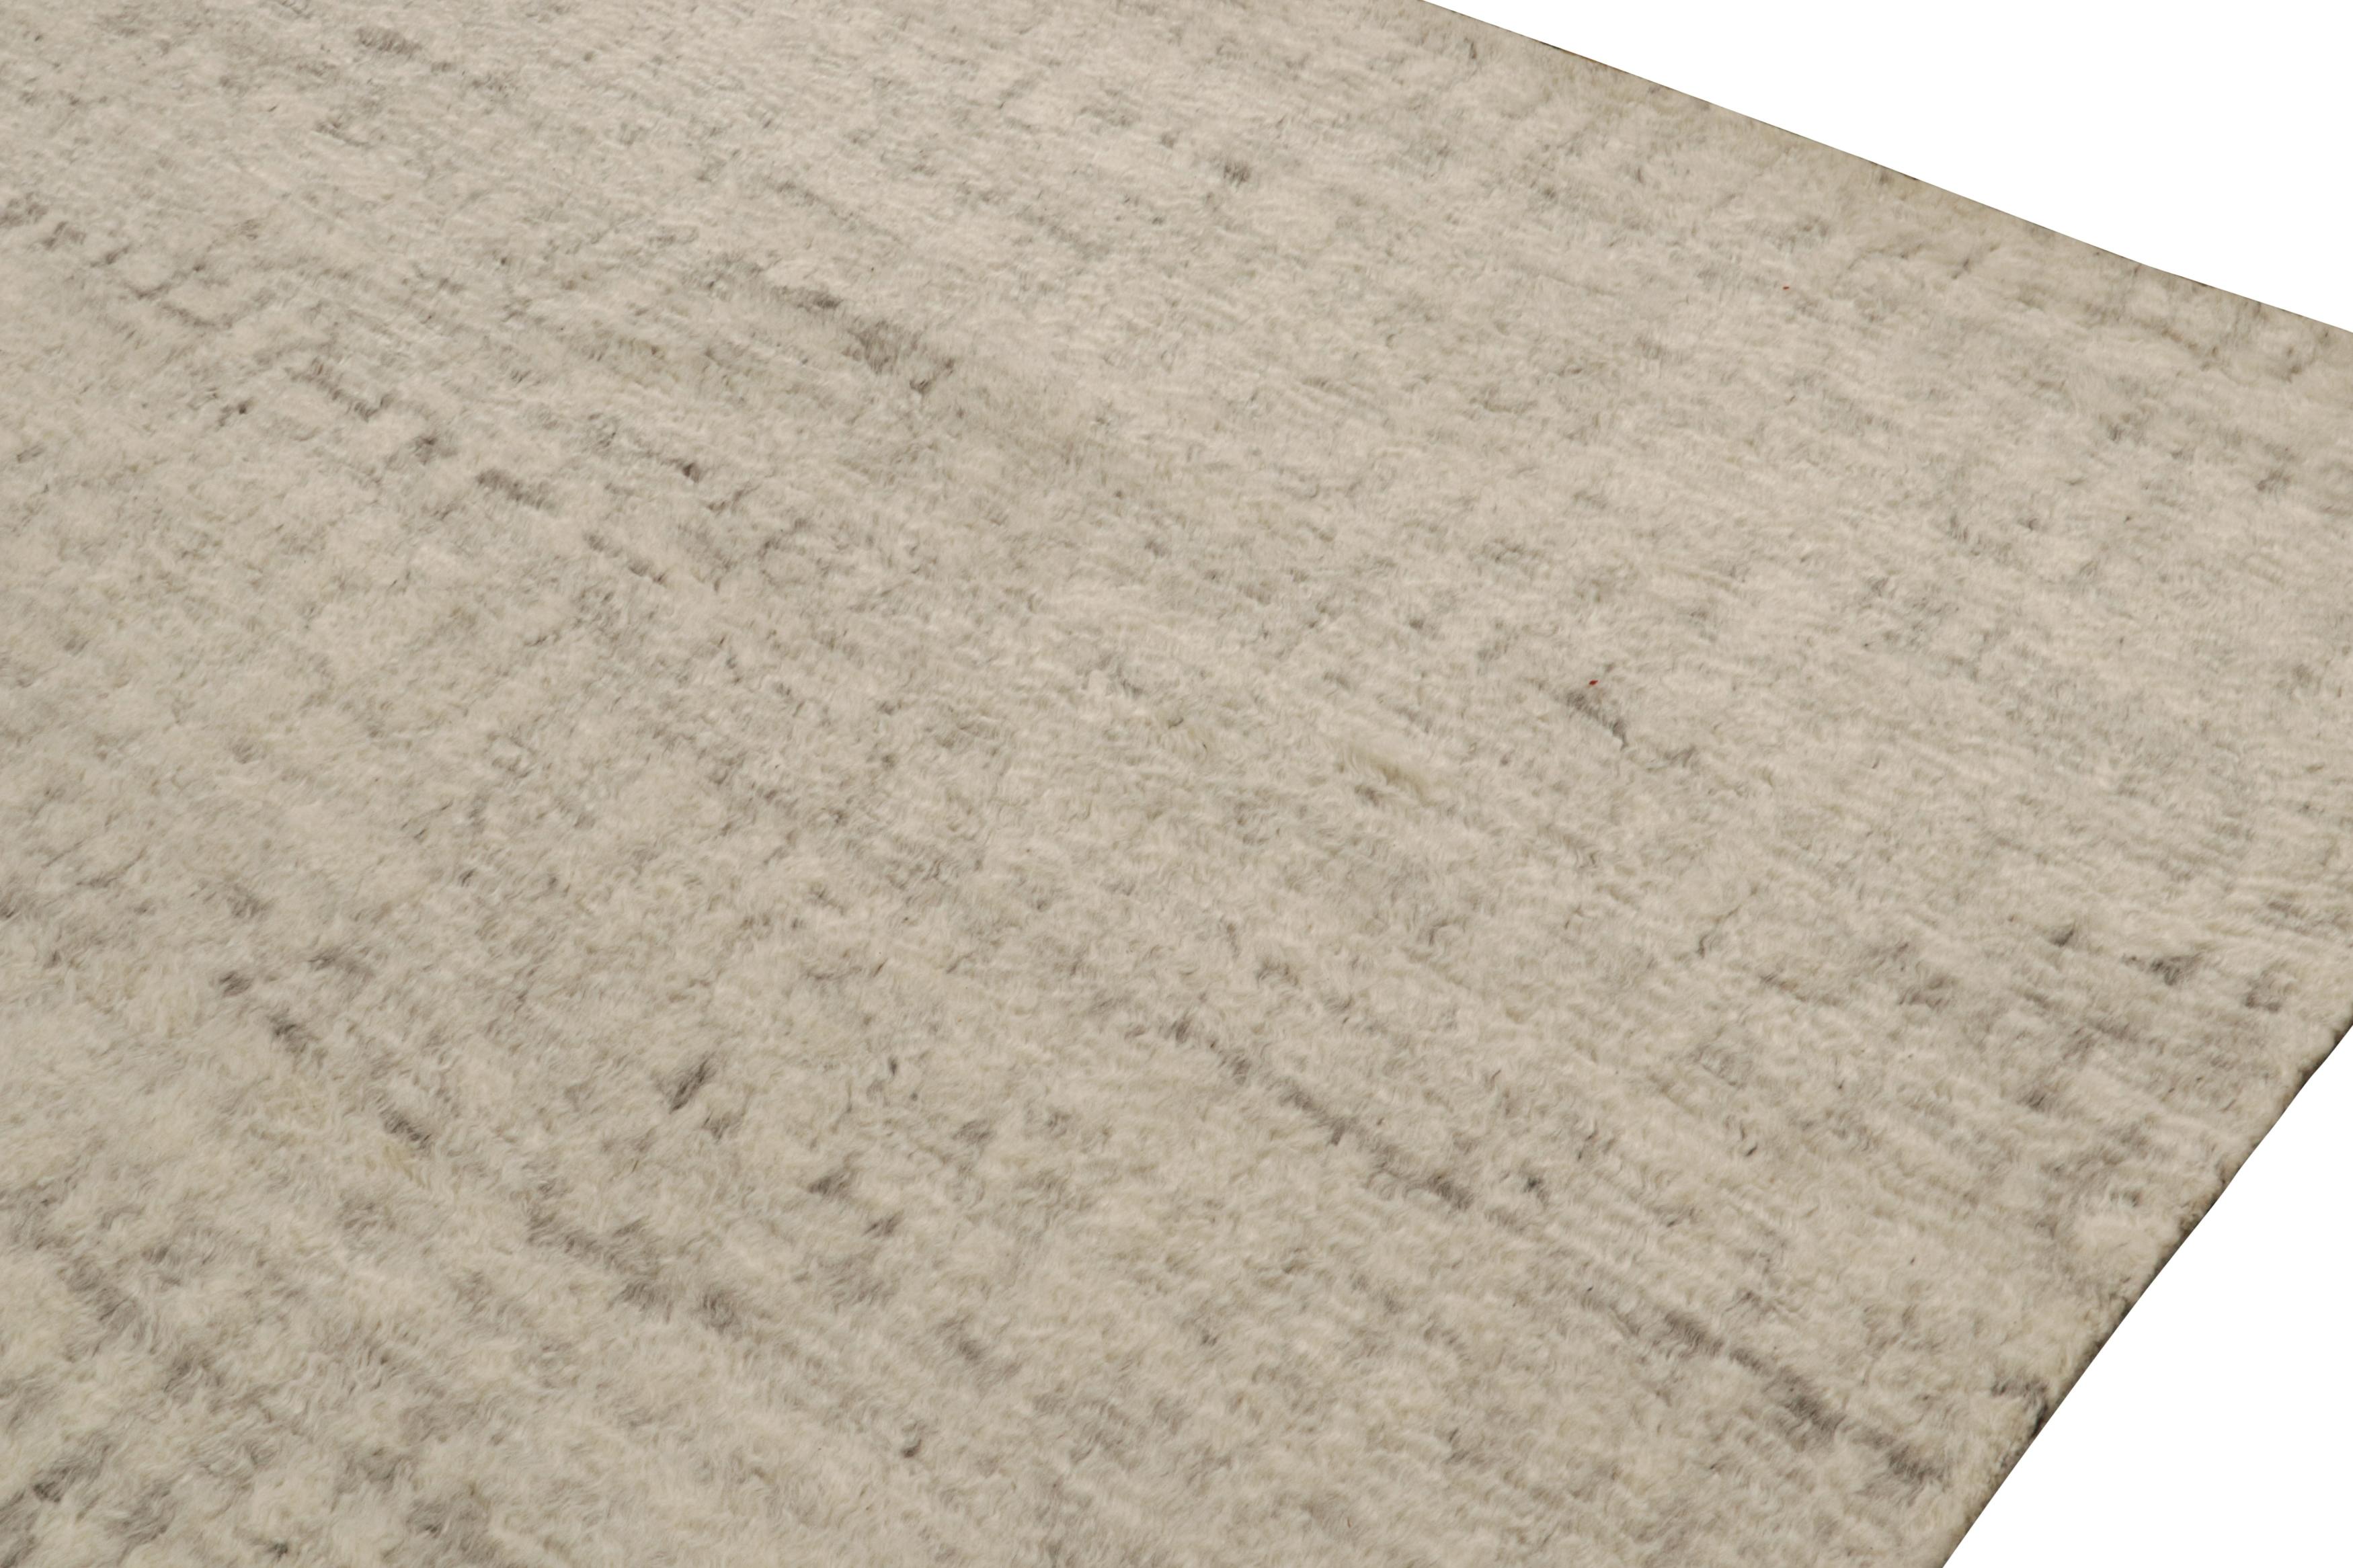 Contemporary Rug & Kilim’s Modern Textural Rug in Beige and Brown Salt and Pepper Tones For Sale